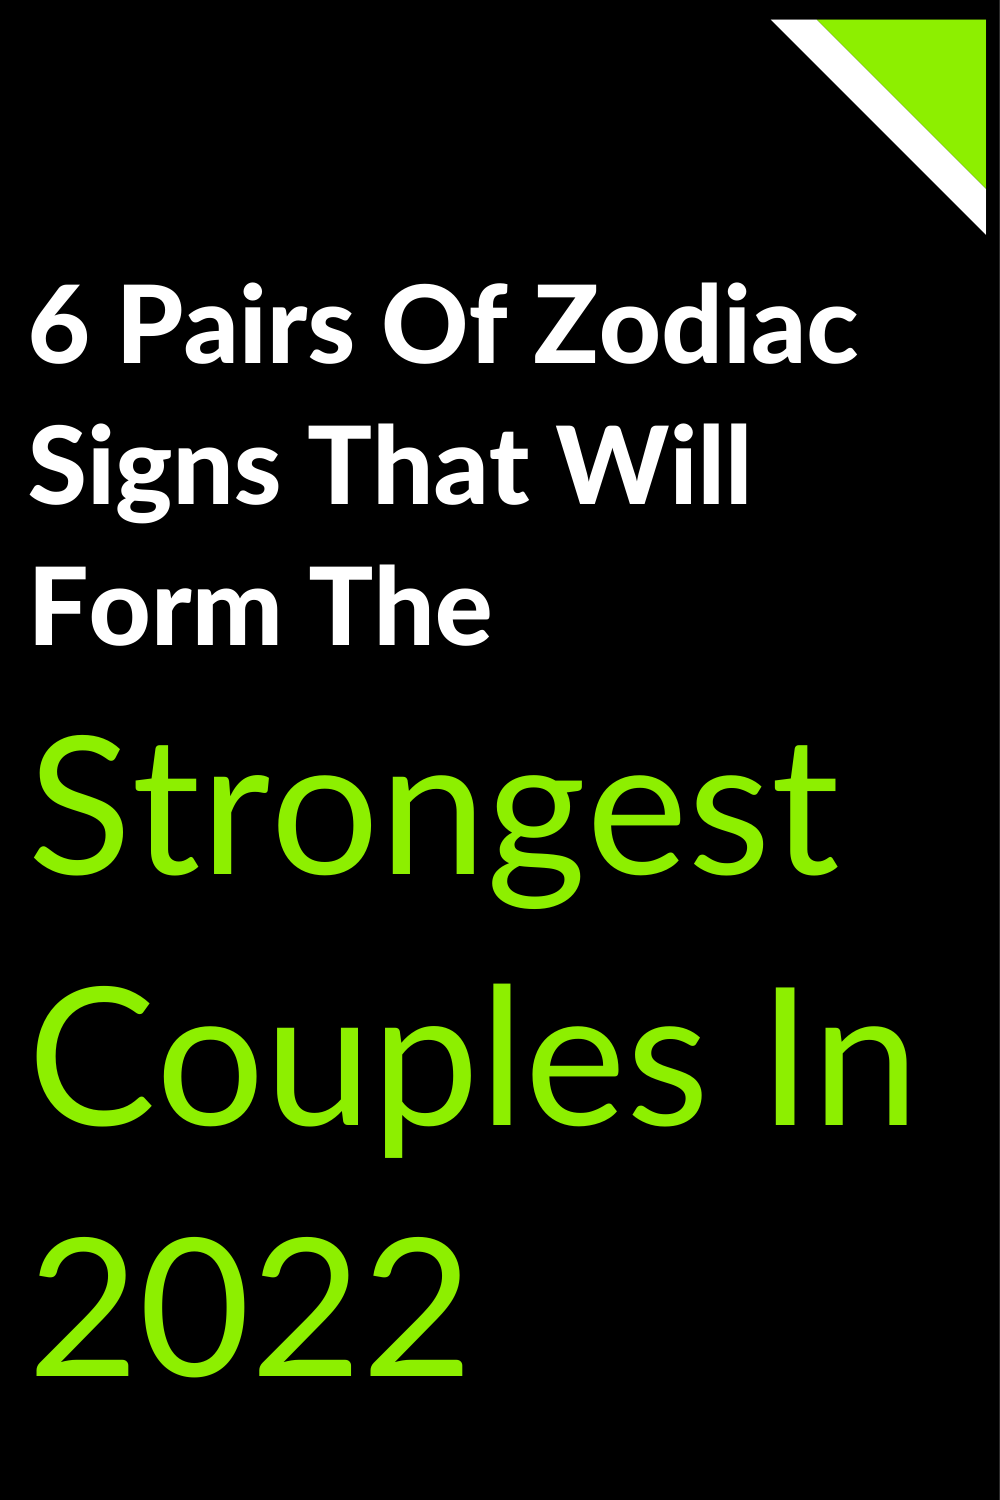 6 Pairs Of Zodiac Signs That Will Form The Strongest Couples In 2022